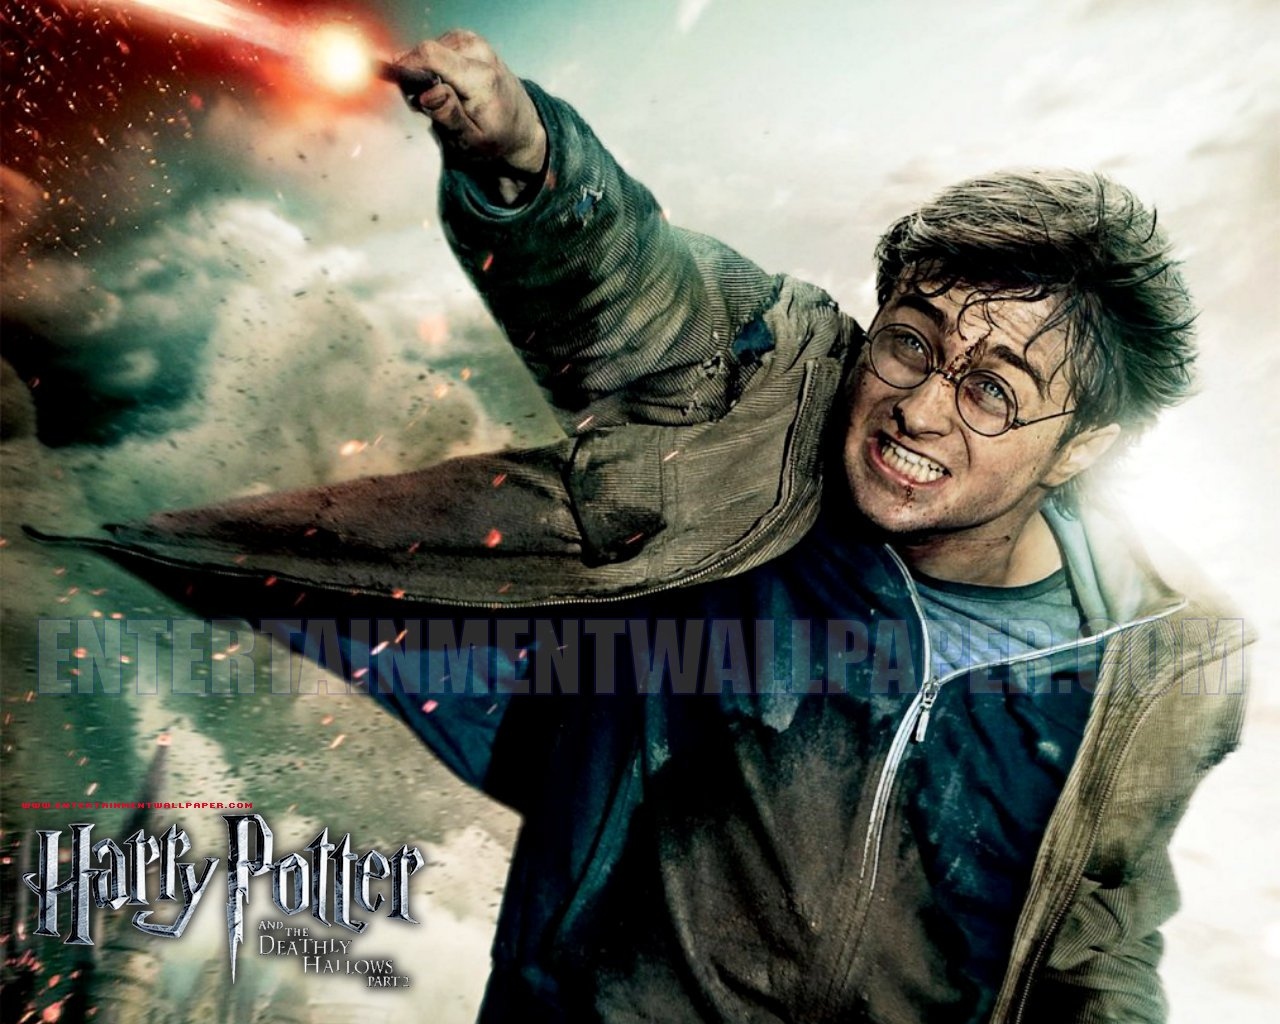 Harry Potter and the Deathly Hallows: Part II (2011) - Upcoming Movies